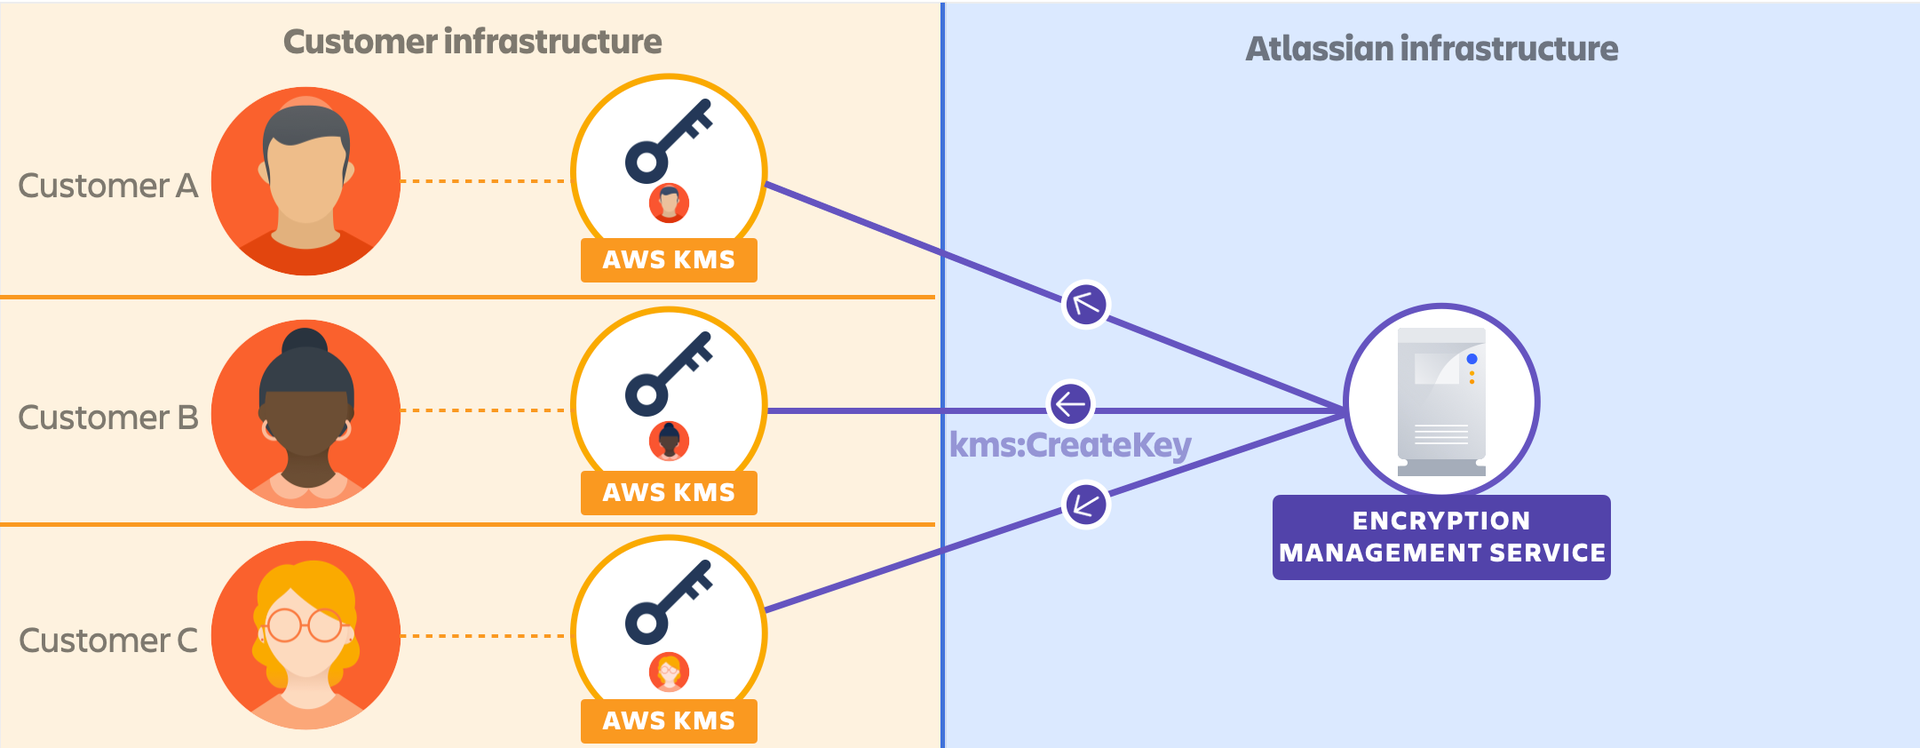 Atlassian requests keys to be provisioned in the customers’ own AWS accounts.